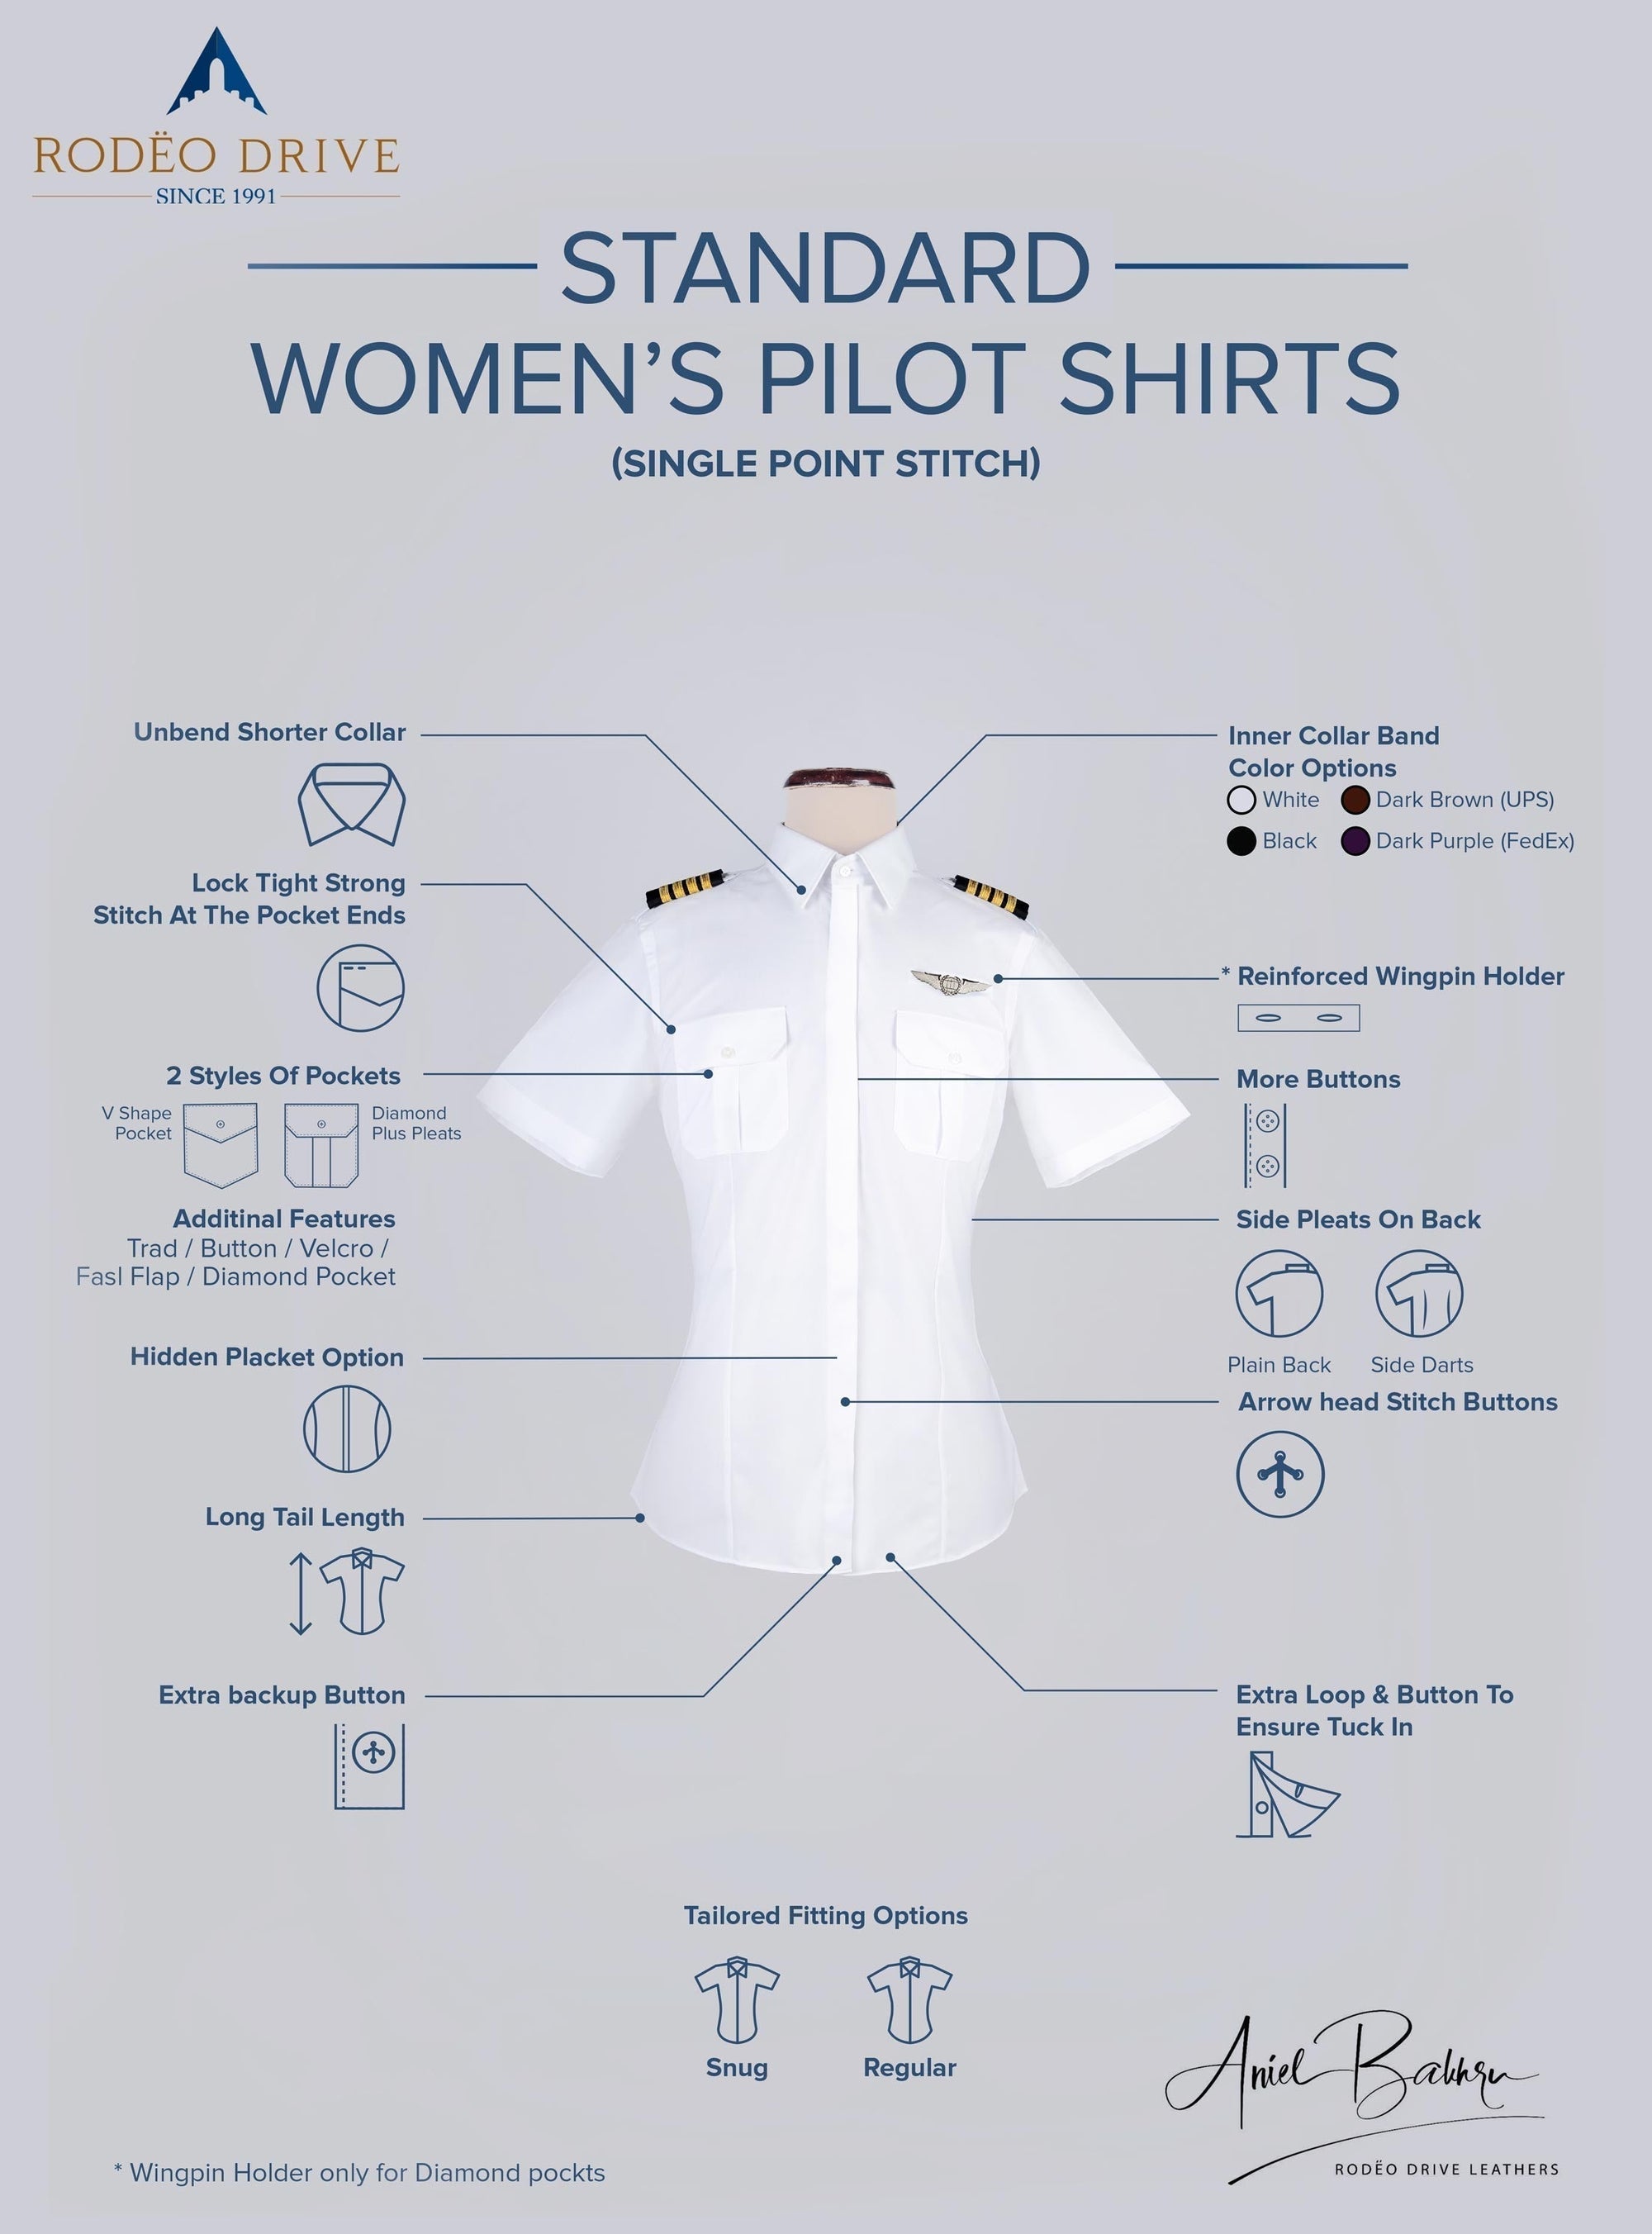 Anatomy of white Standard Women's Pilot shirt. Different parts dimensions and utility are explained.